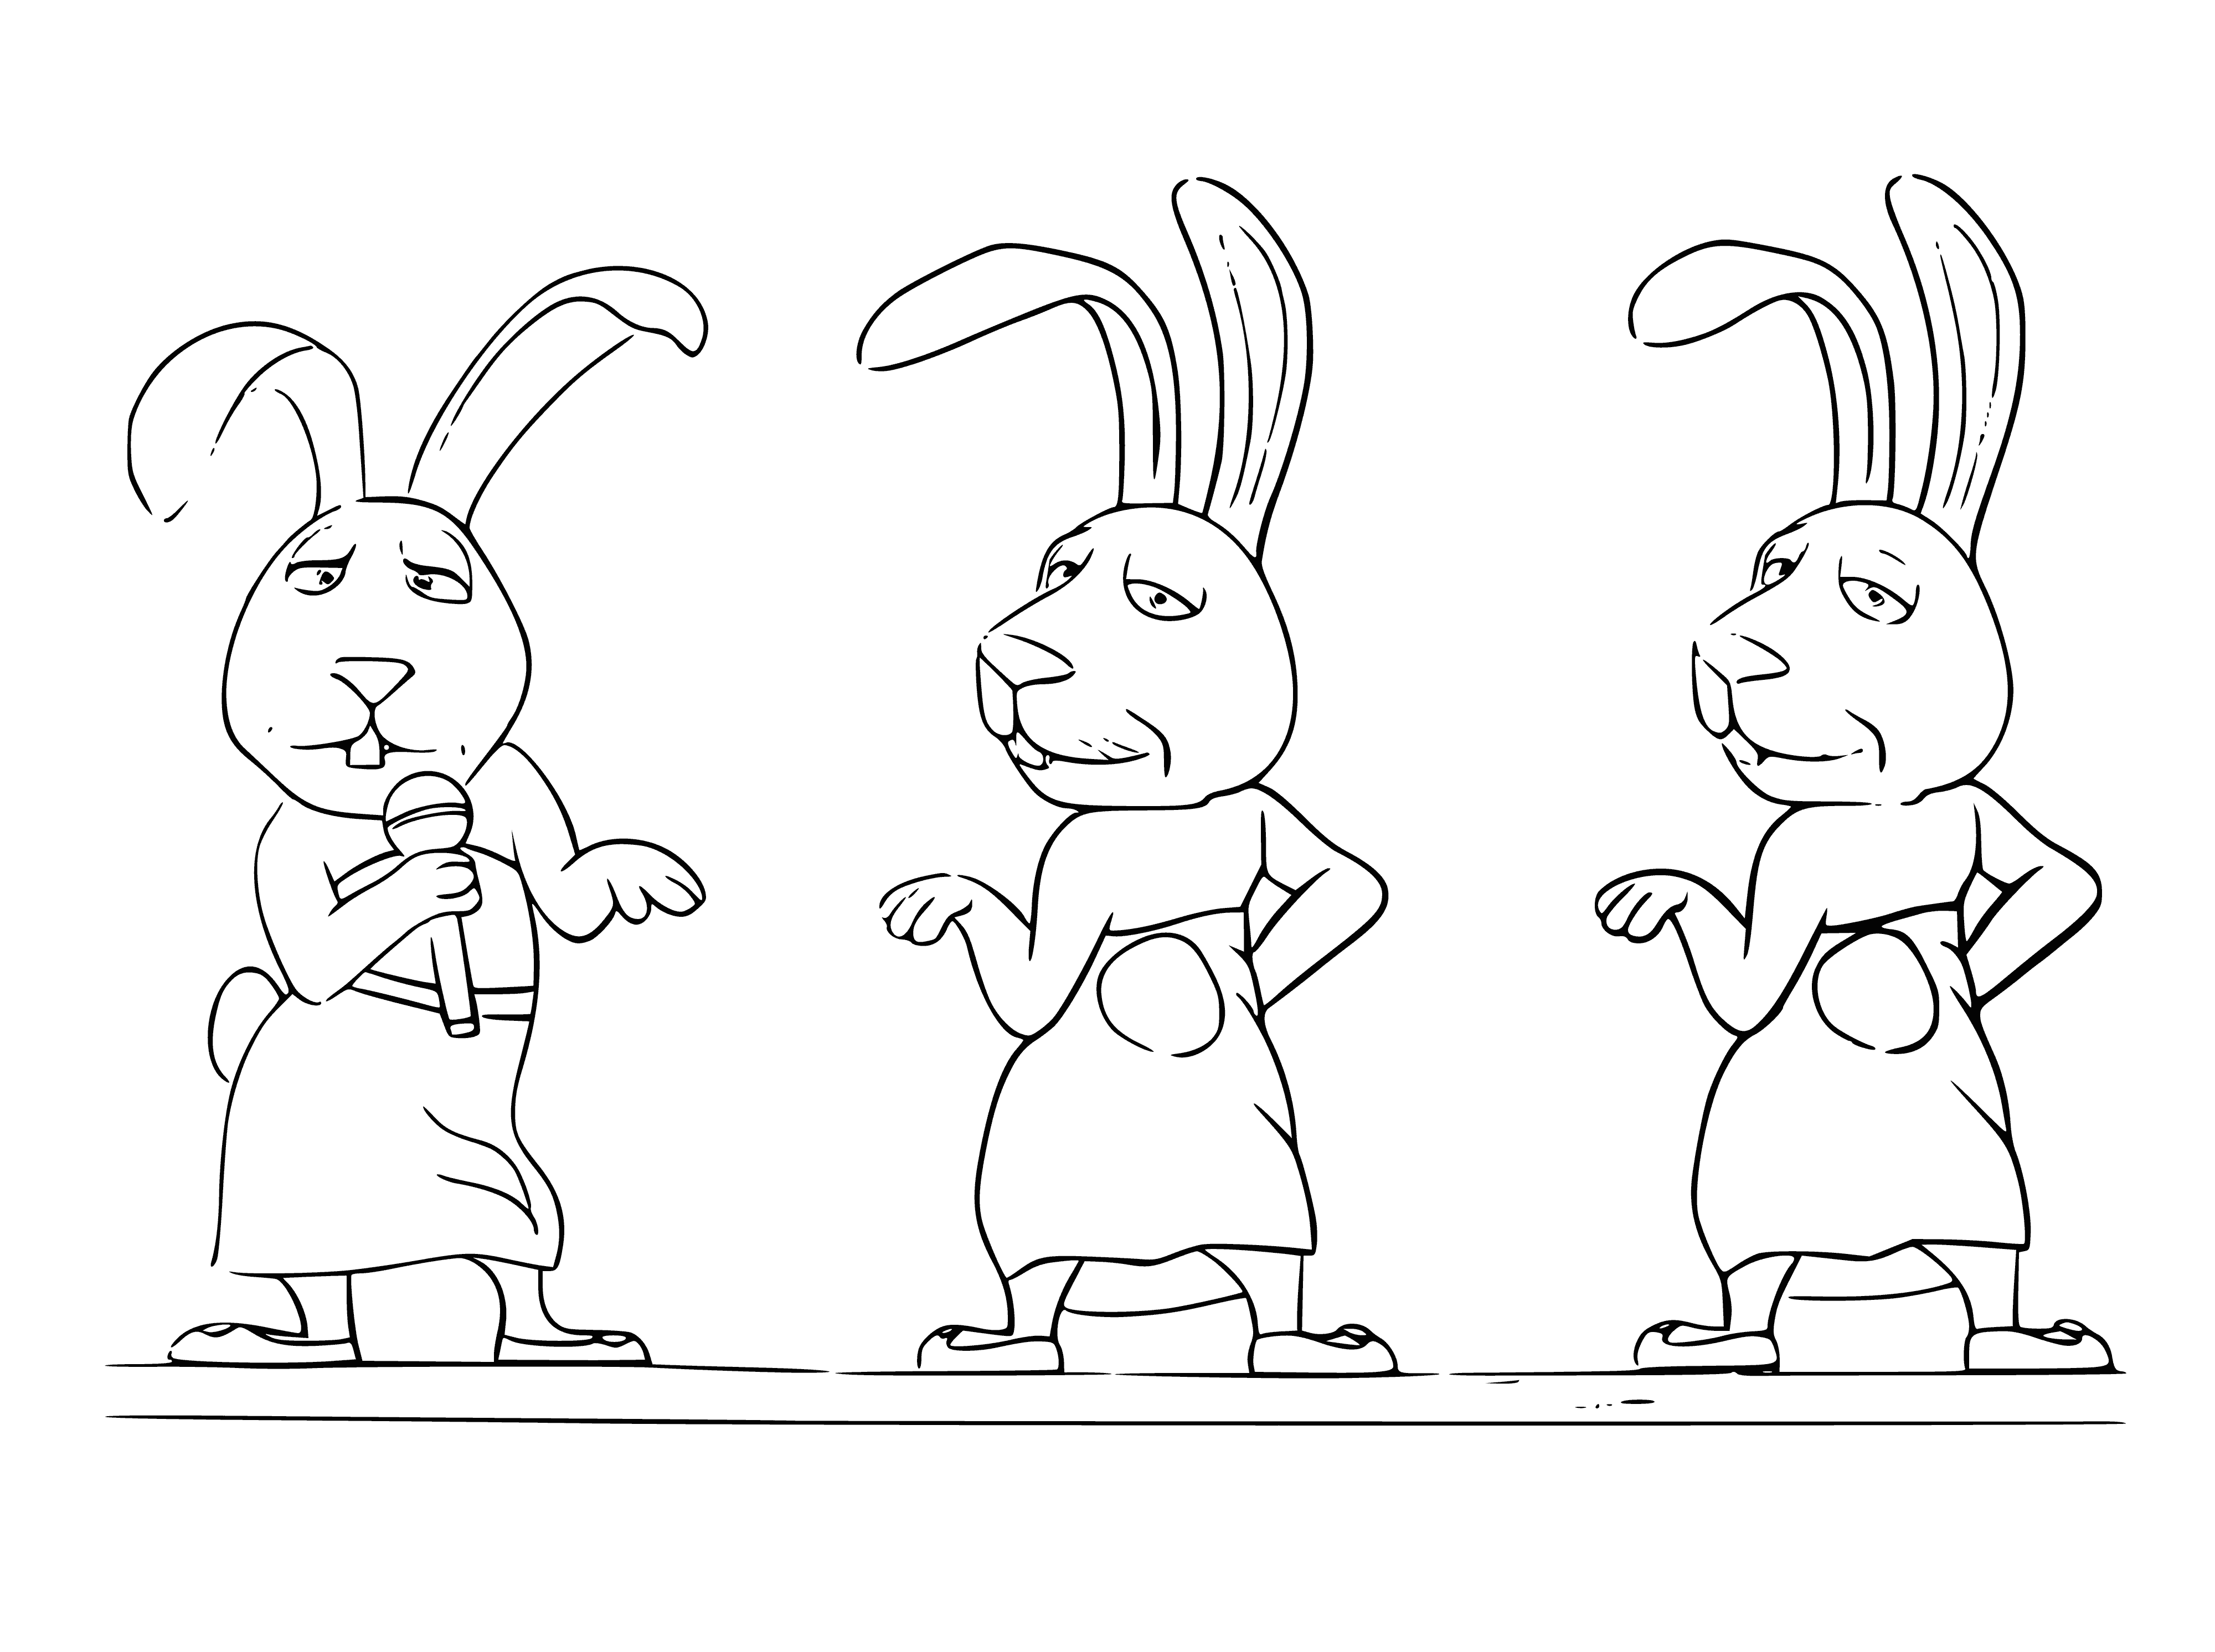 Rabbits on the stage coloring page